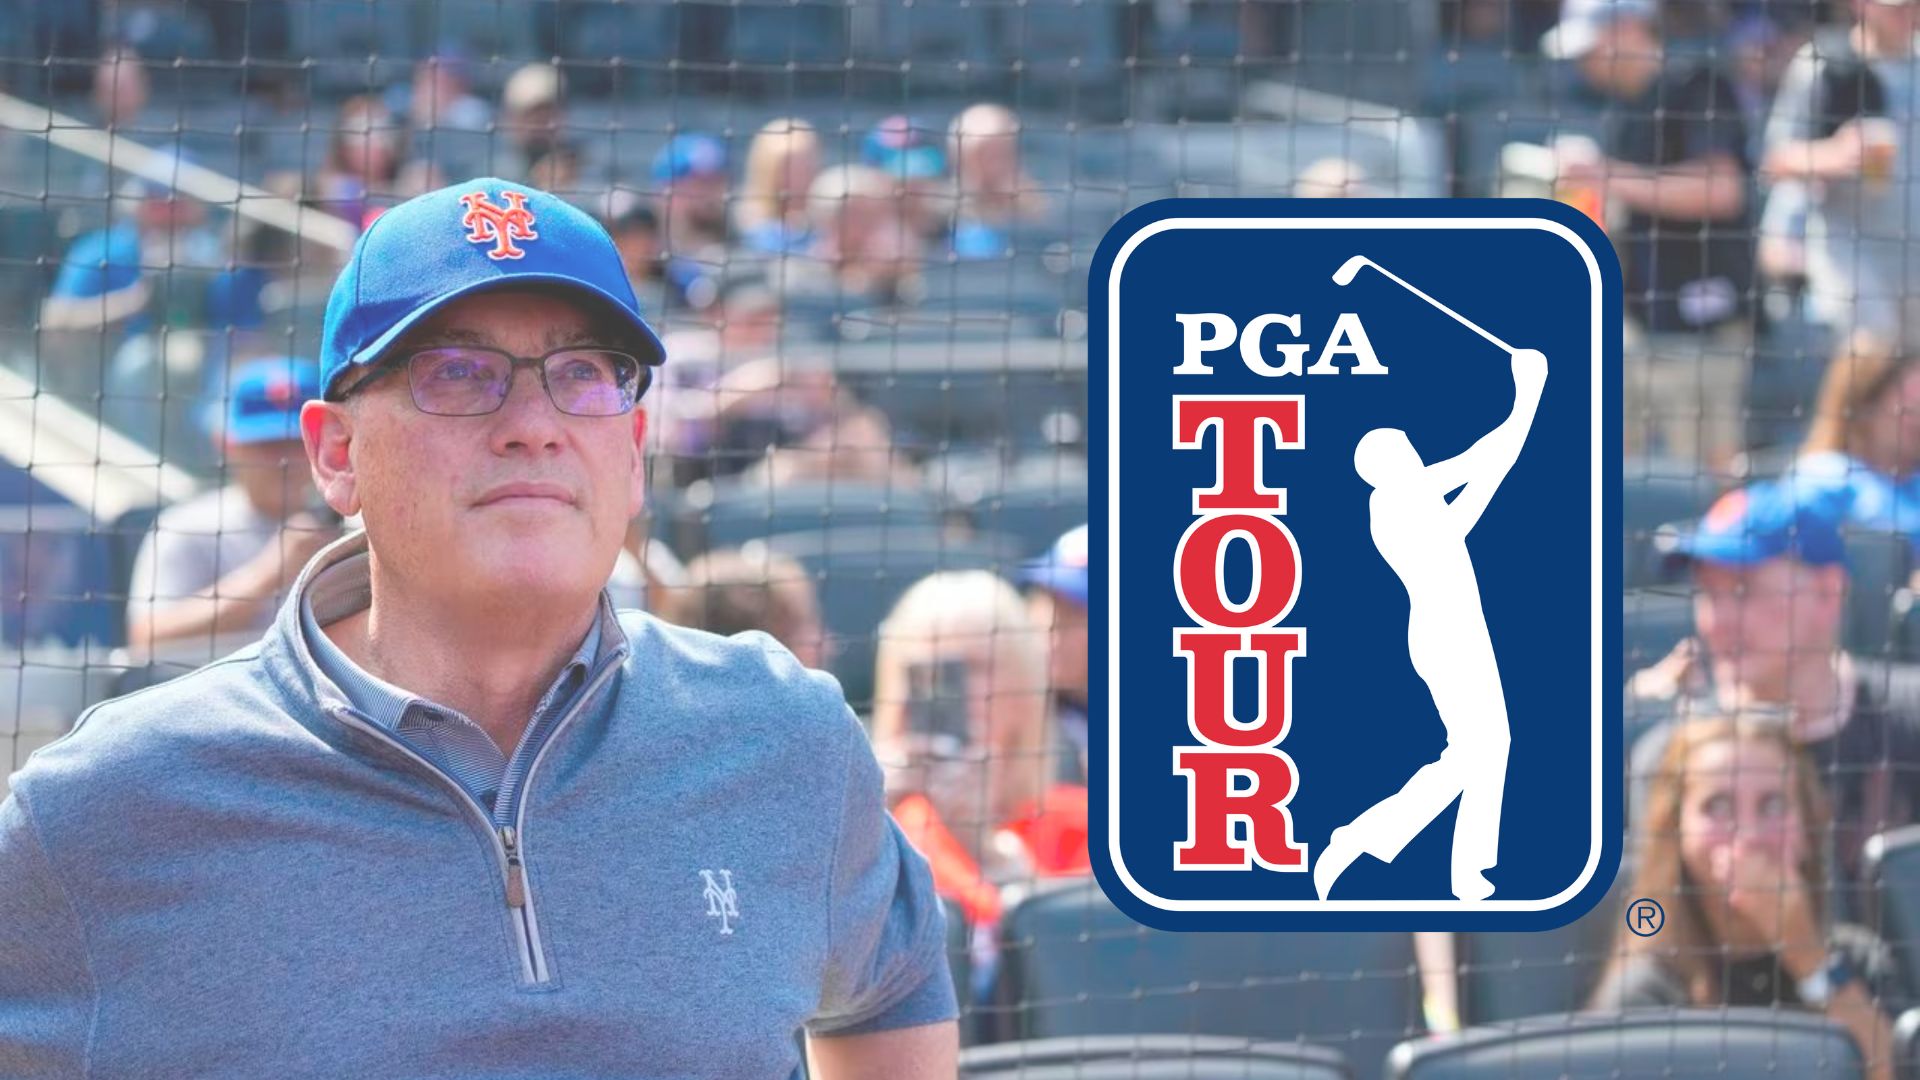 Steve Cohen of the Mets Commits $3 Billion Investment in PGA Tour, Boosting Valuation to $12 Billion